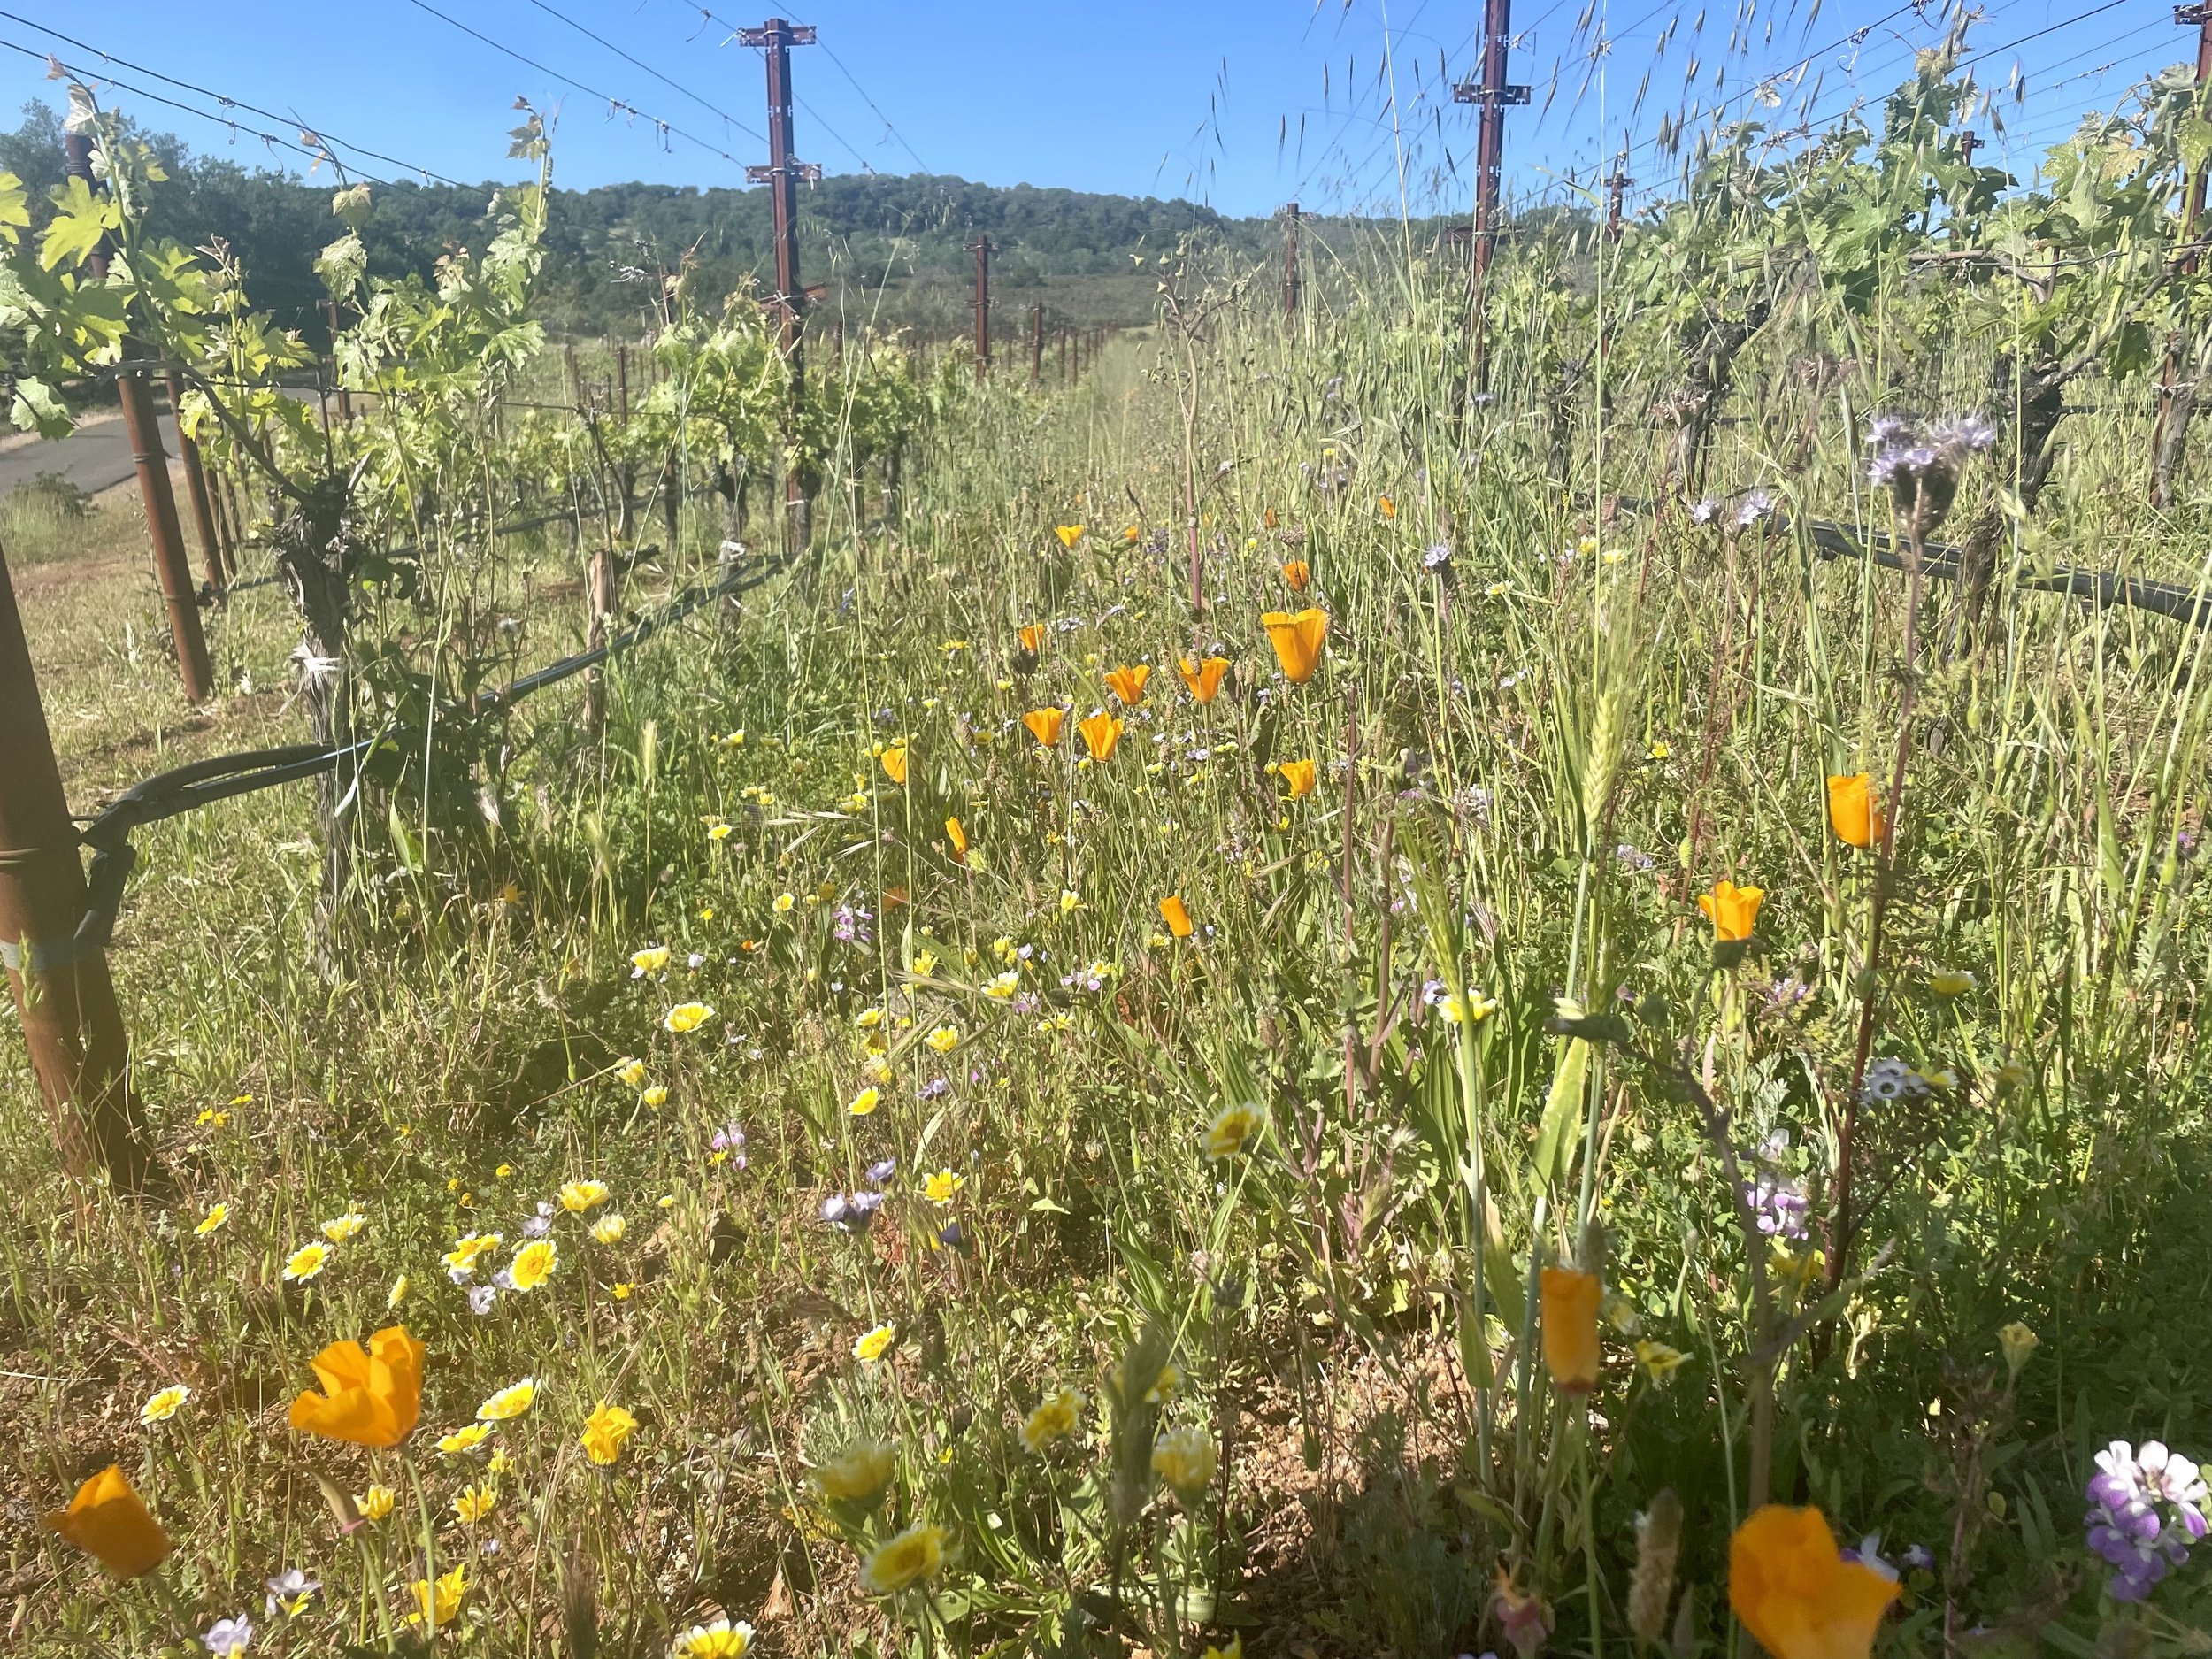 Vineyard cover crop referenced for creation of mural